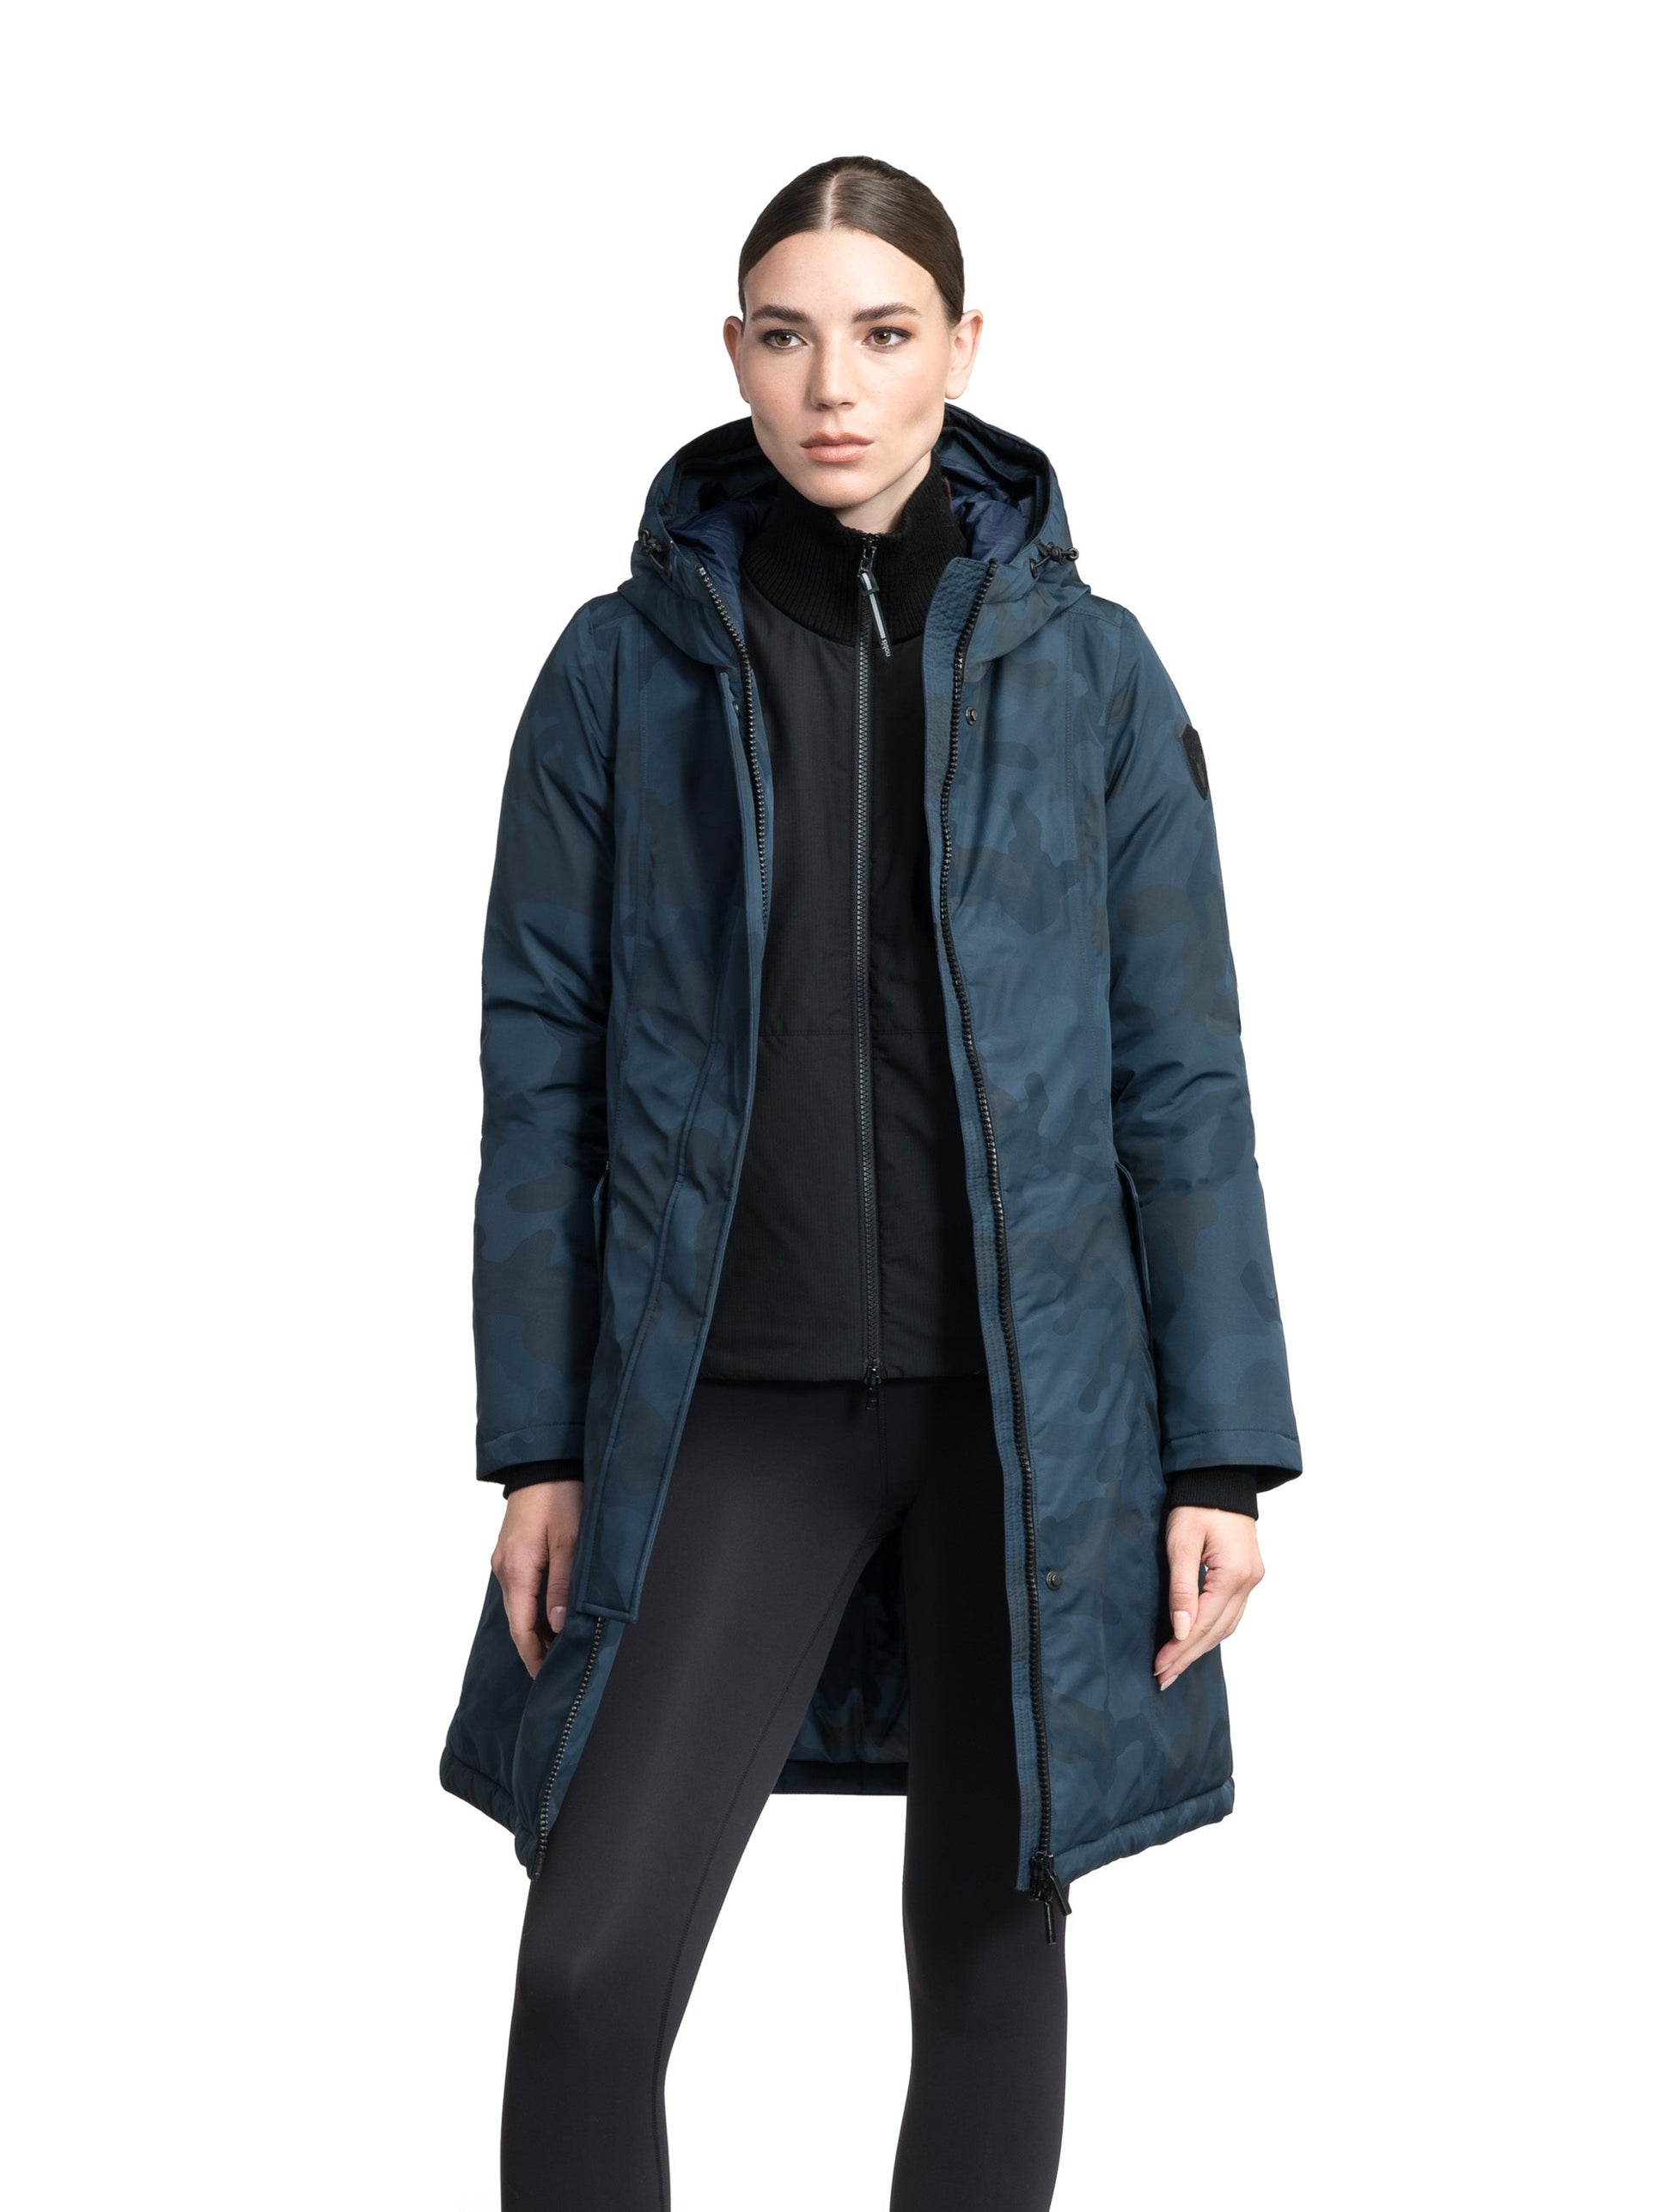 Ladies thigh length down-filled parka with non-removable hood in Navy Camo